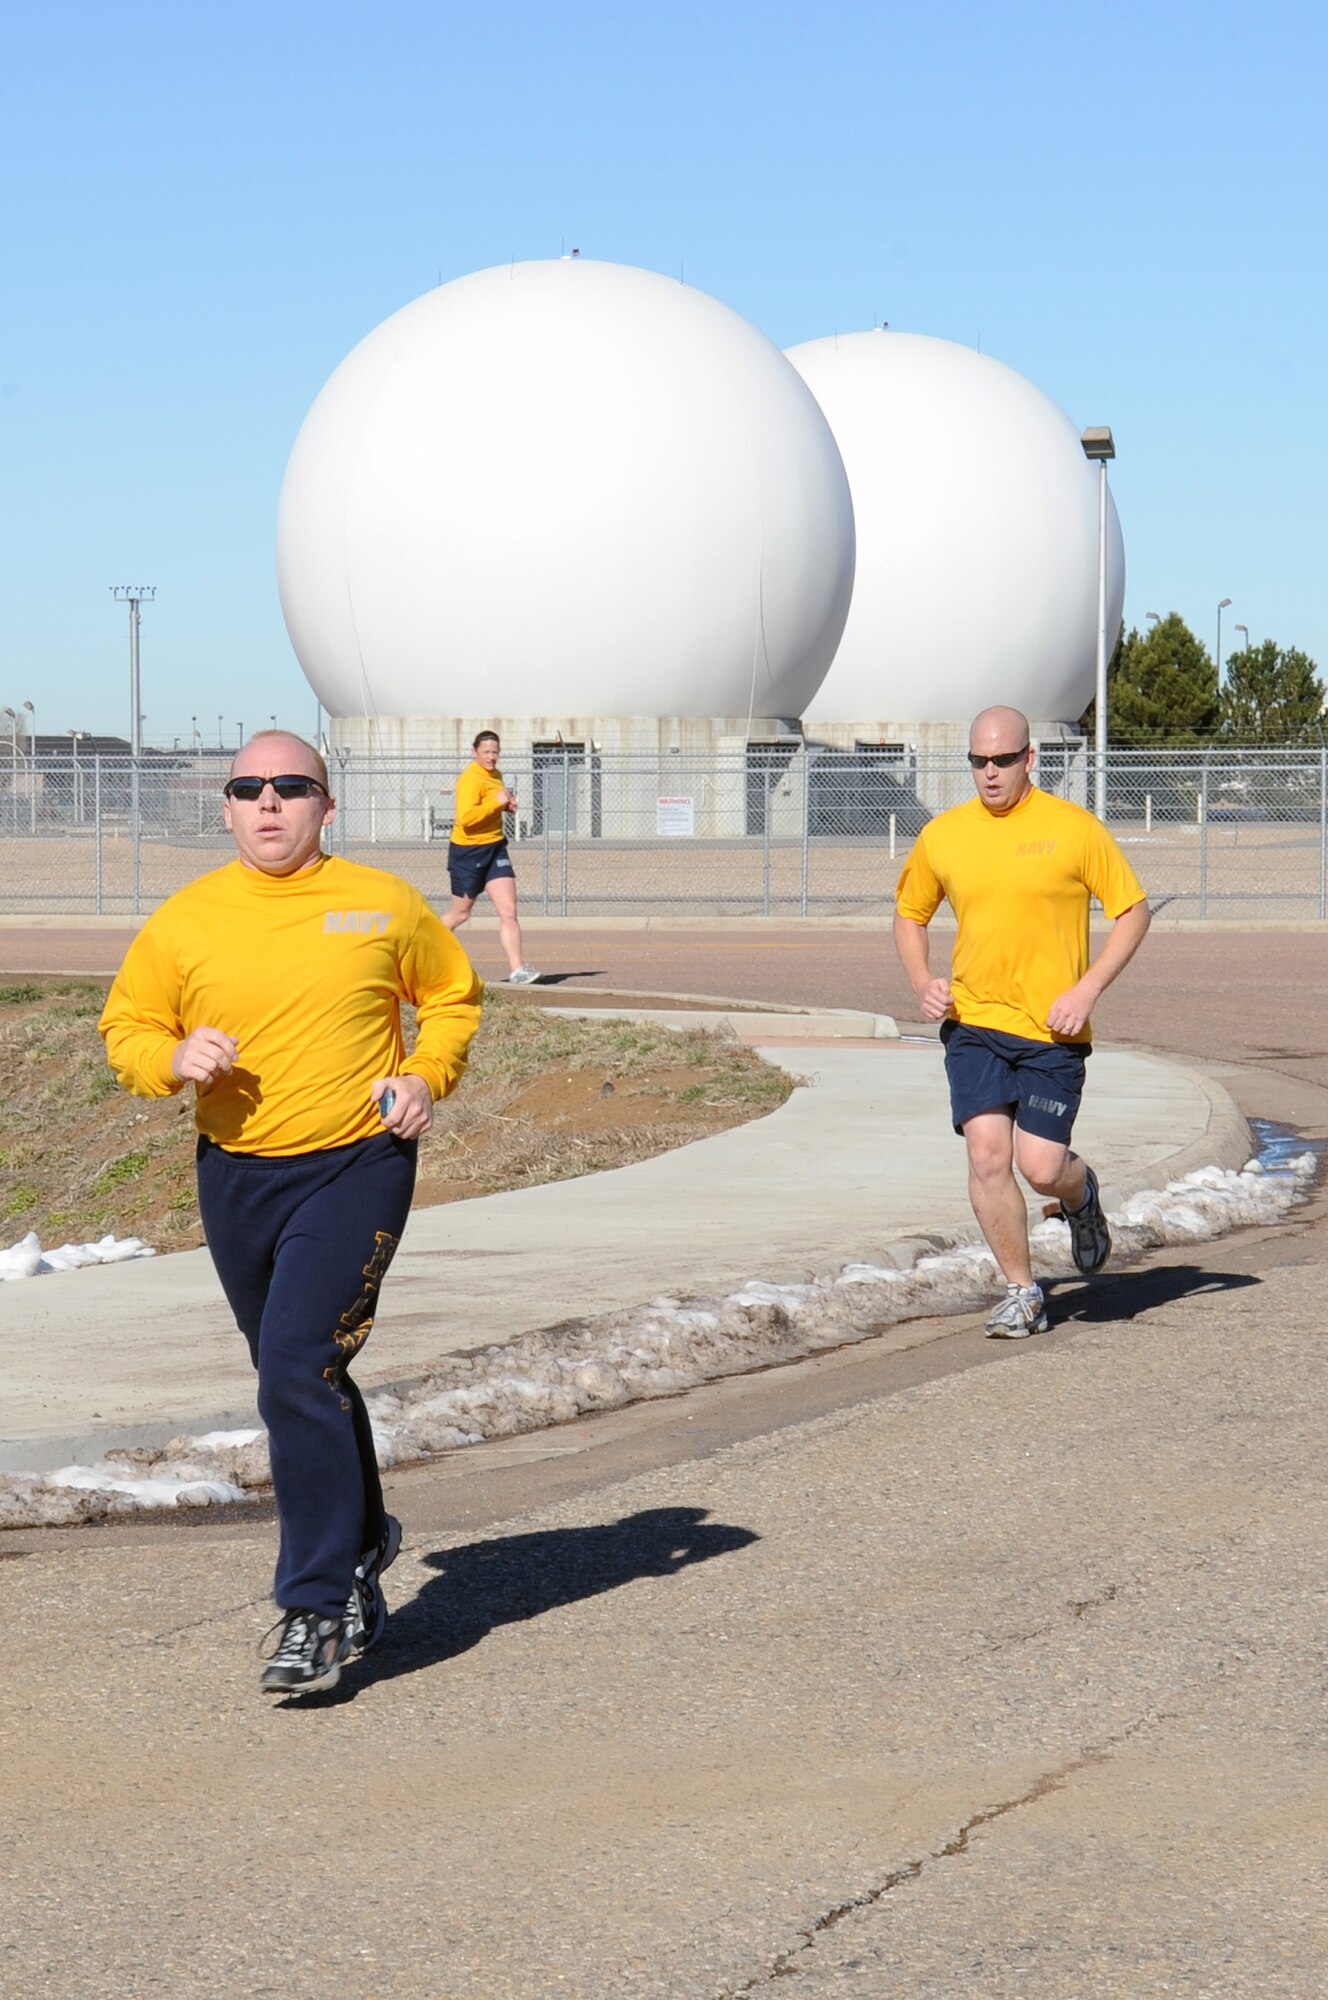 BUCKLEY AIR FORCE BASE, Colo. -- Team Buckley runners speed toward the finish line during the annual Turkey Trot Nov. 18. First-place finishers were awarded a free turkey. (U.S. Air Force photo by Airman First Class Marcy Glass)